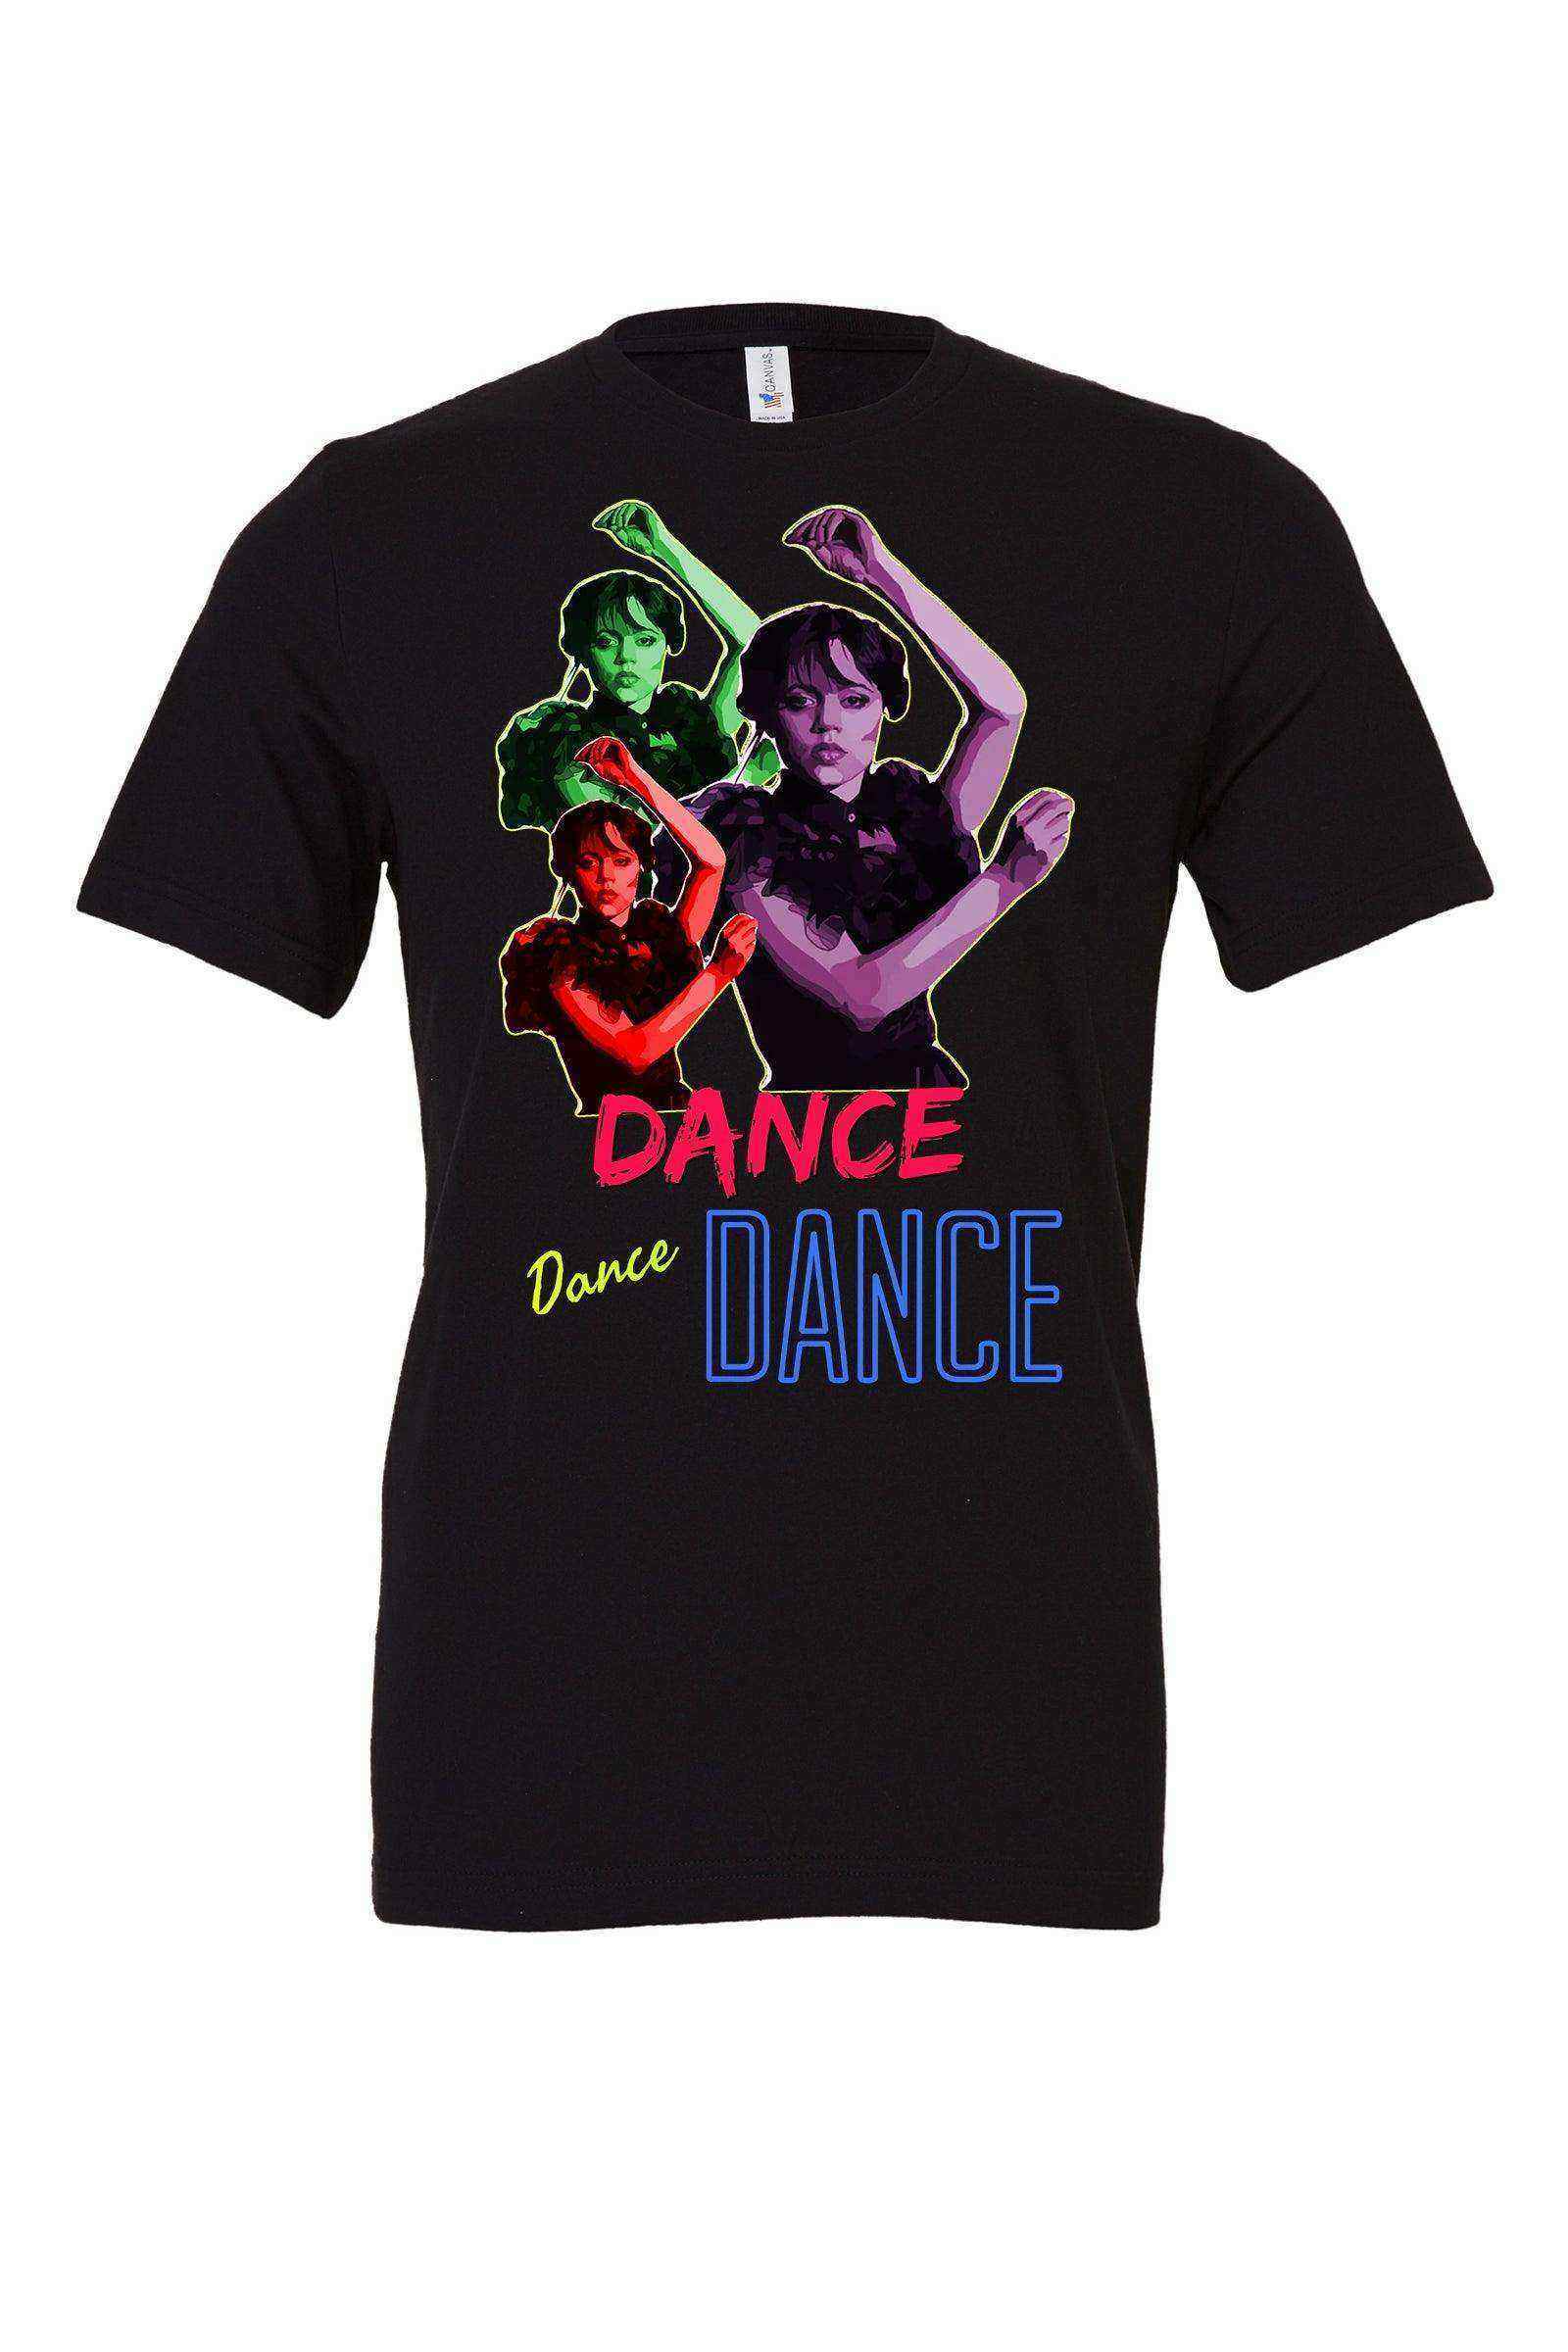 Wednesday Dance With My Hands Shirt | Addams Family | Wednesday Shirt - Dylan's Tees